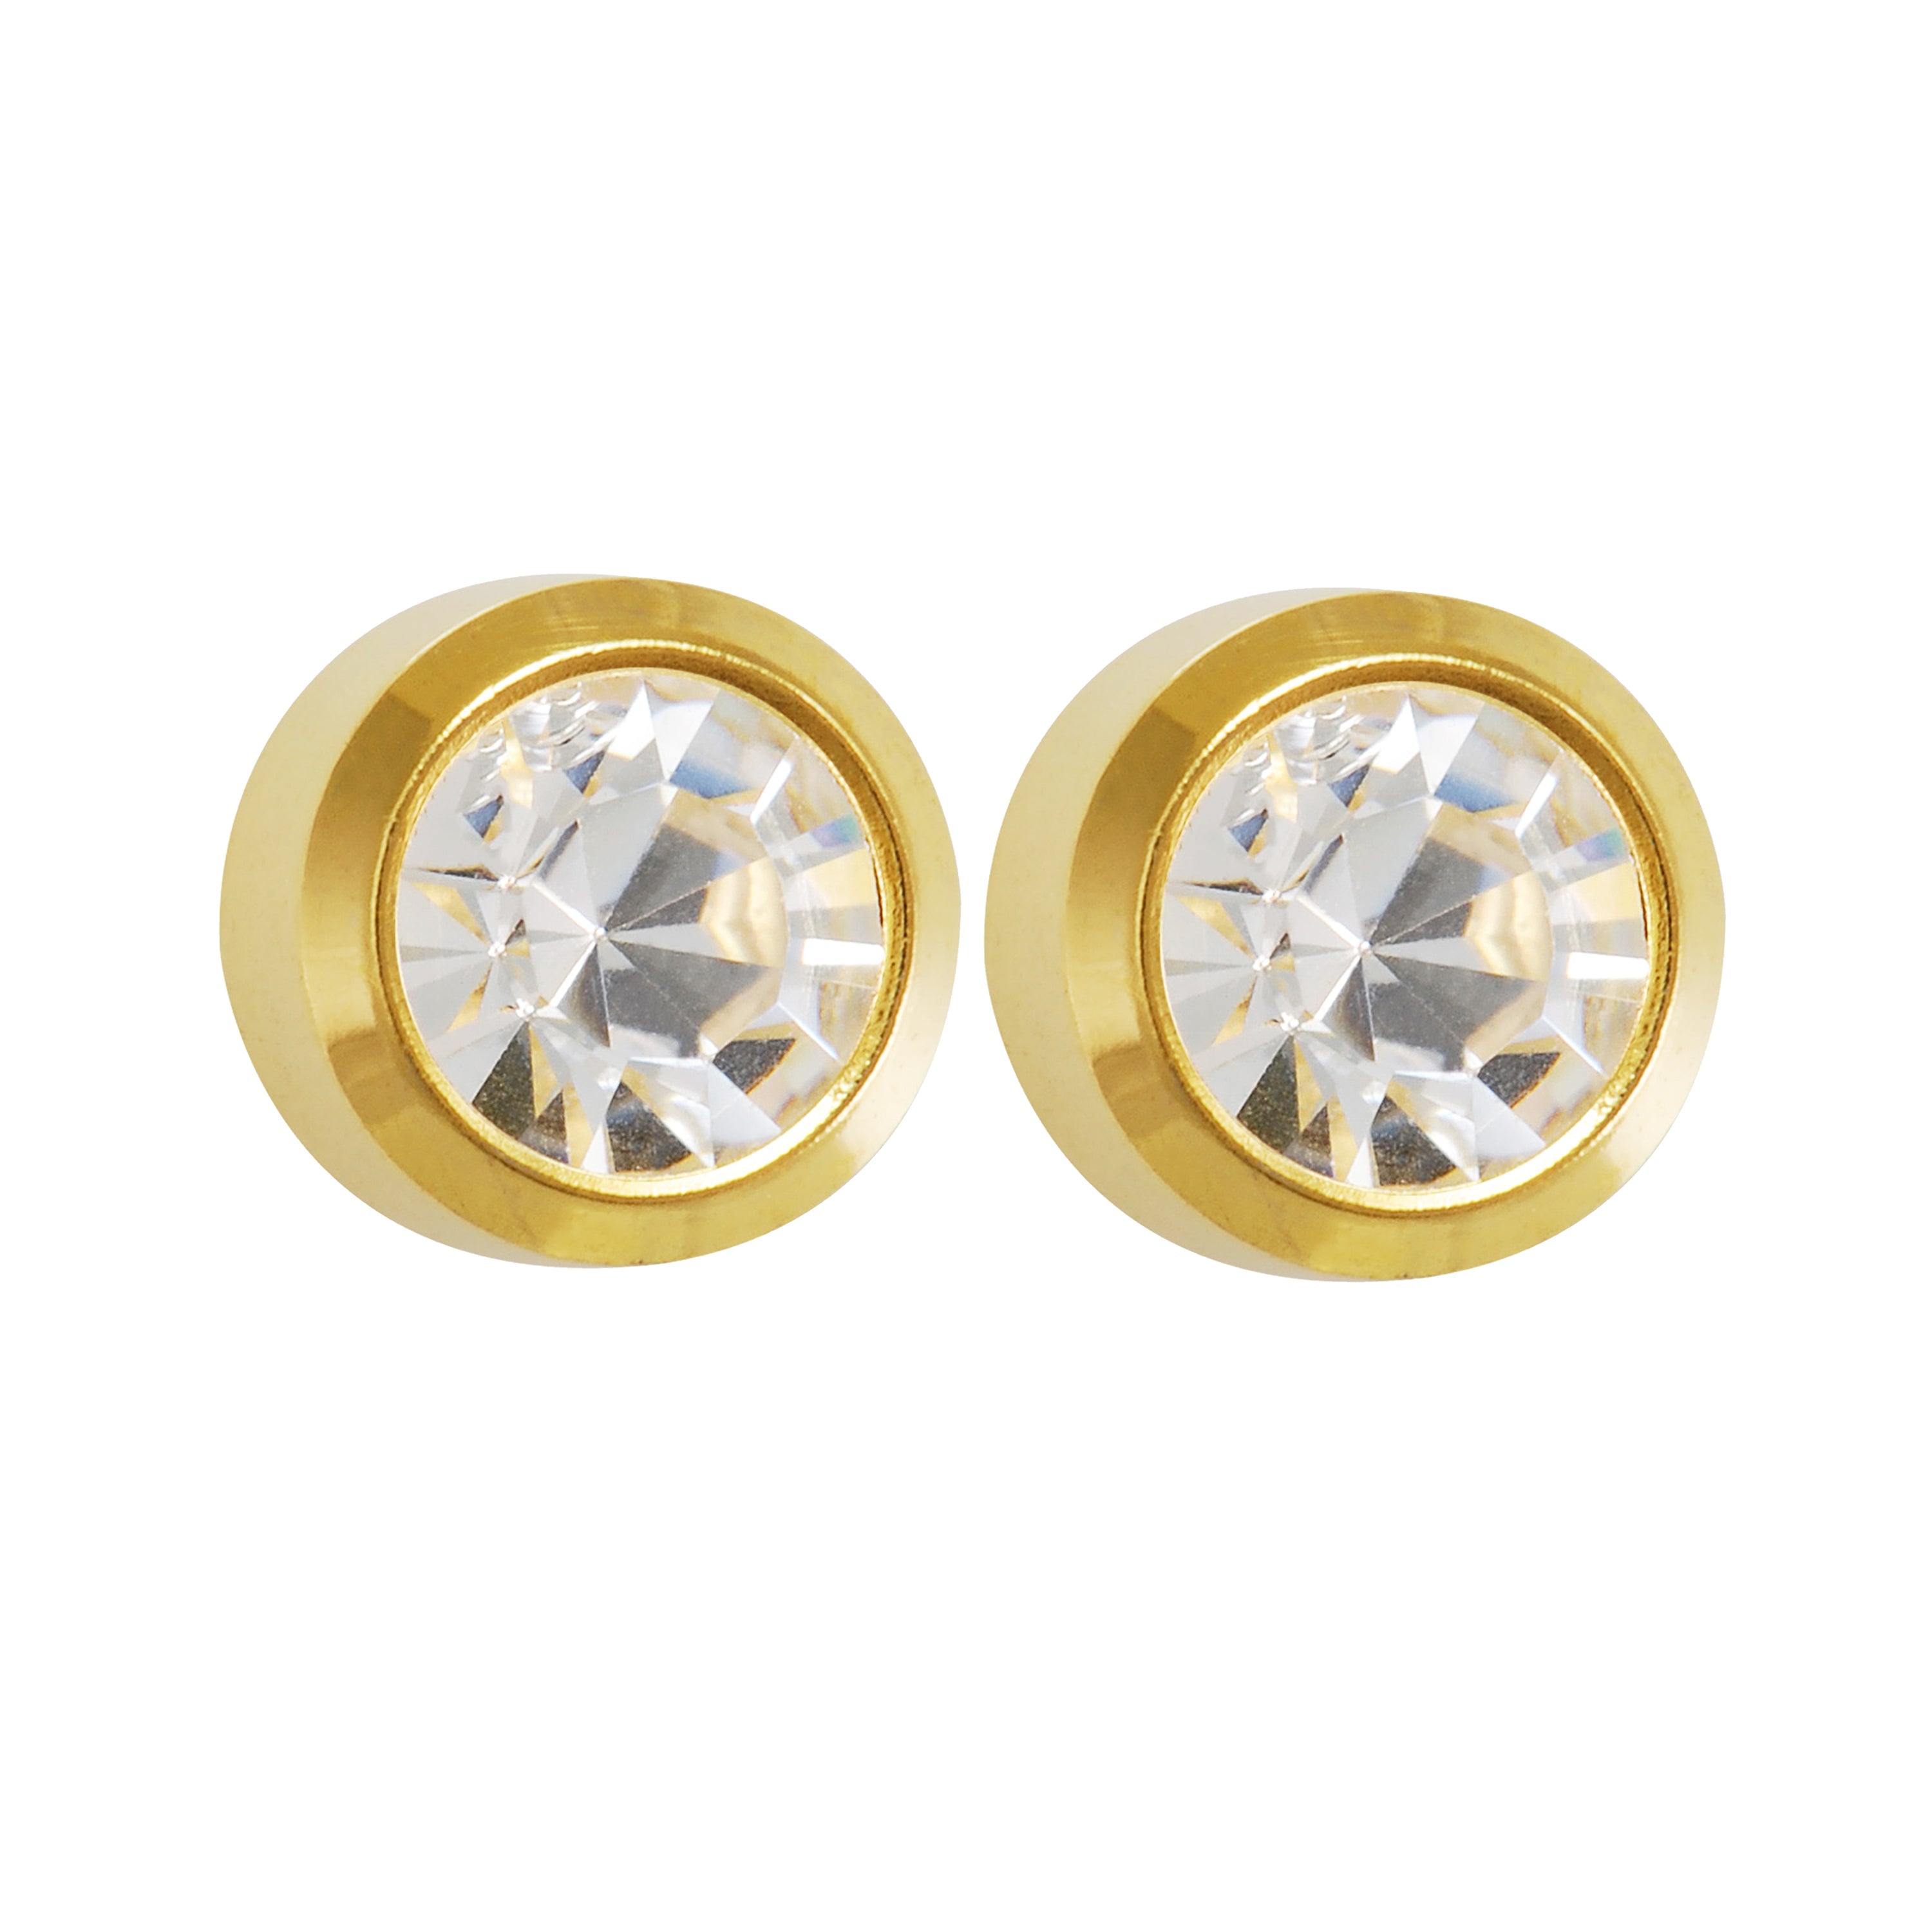 3MM April – Crystal Bezel 24K Pure Gold Plated Ear Studs | MADE IN USA | Ideal for everyday wear